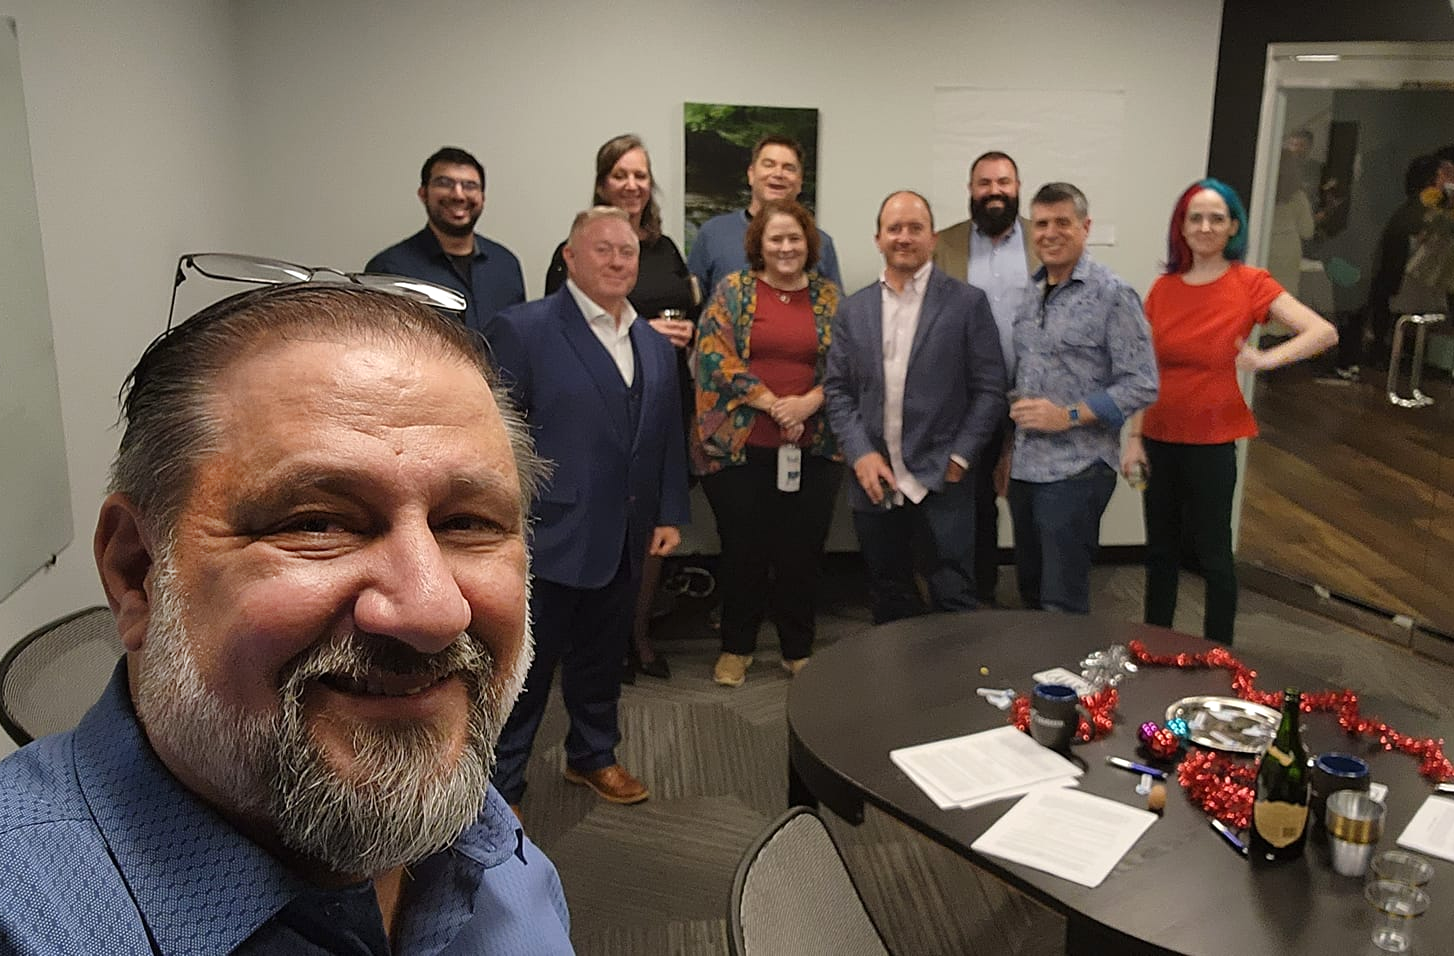 Dax takes a group photo at the signing party for the merger with Chad Chelius, Jeff Tamburino and several other members of the Tamman team. The merger documents and pens are on the table in the foreground, along with celebratory champagne.